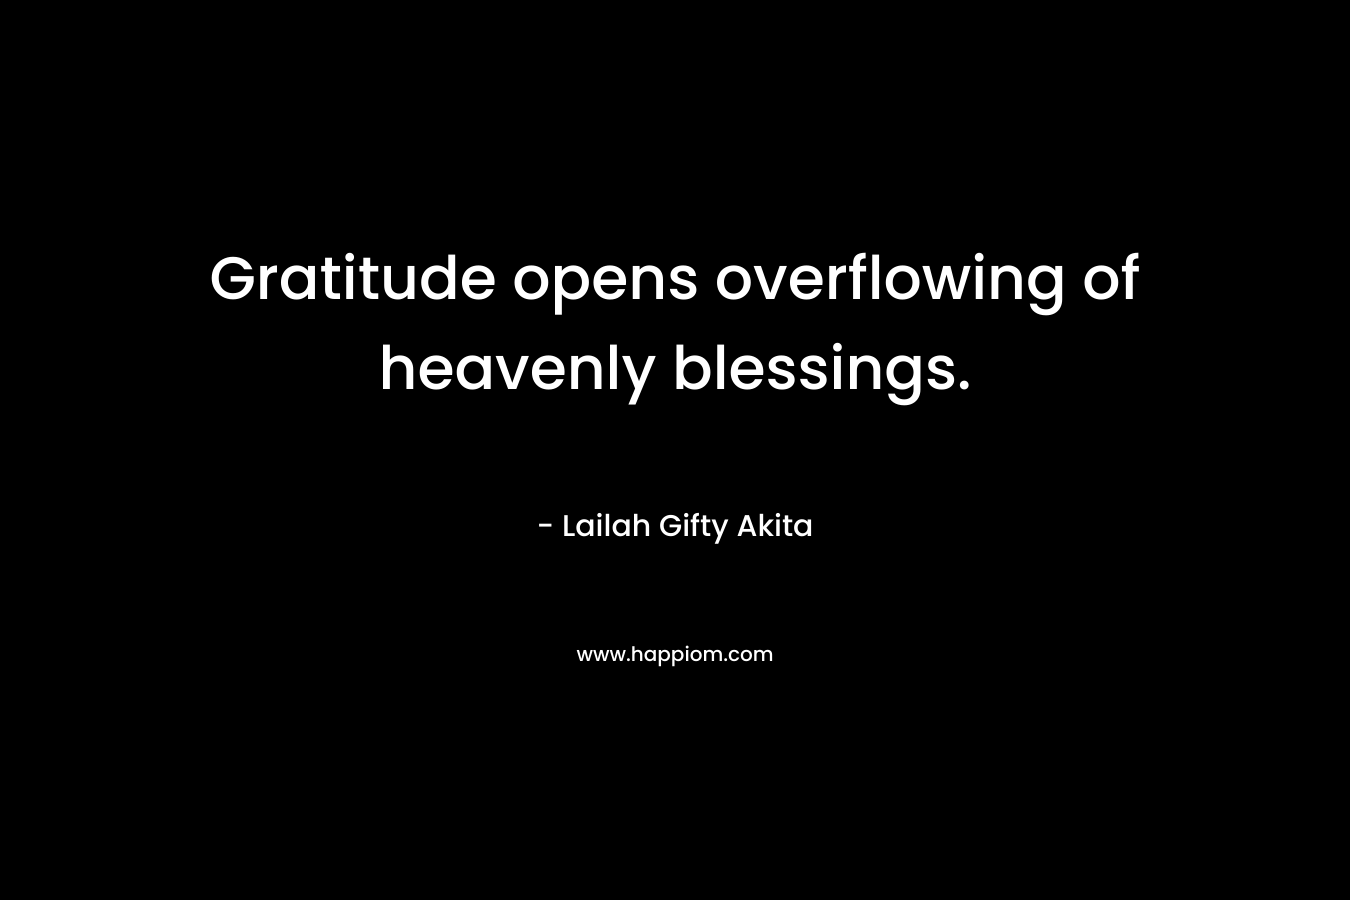 Gratitude opens overflowing of heavenly blessings.